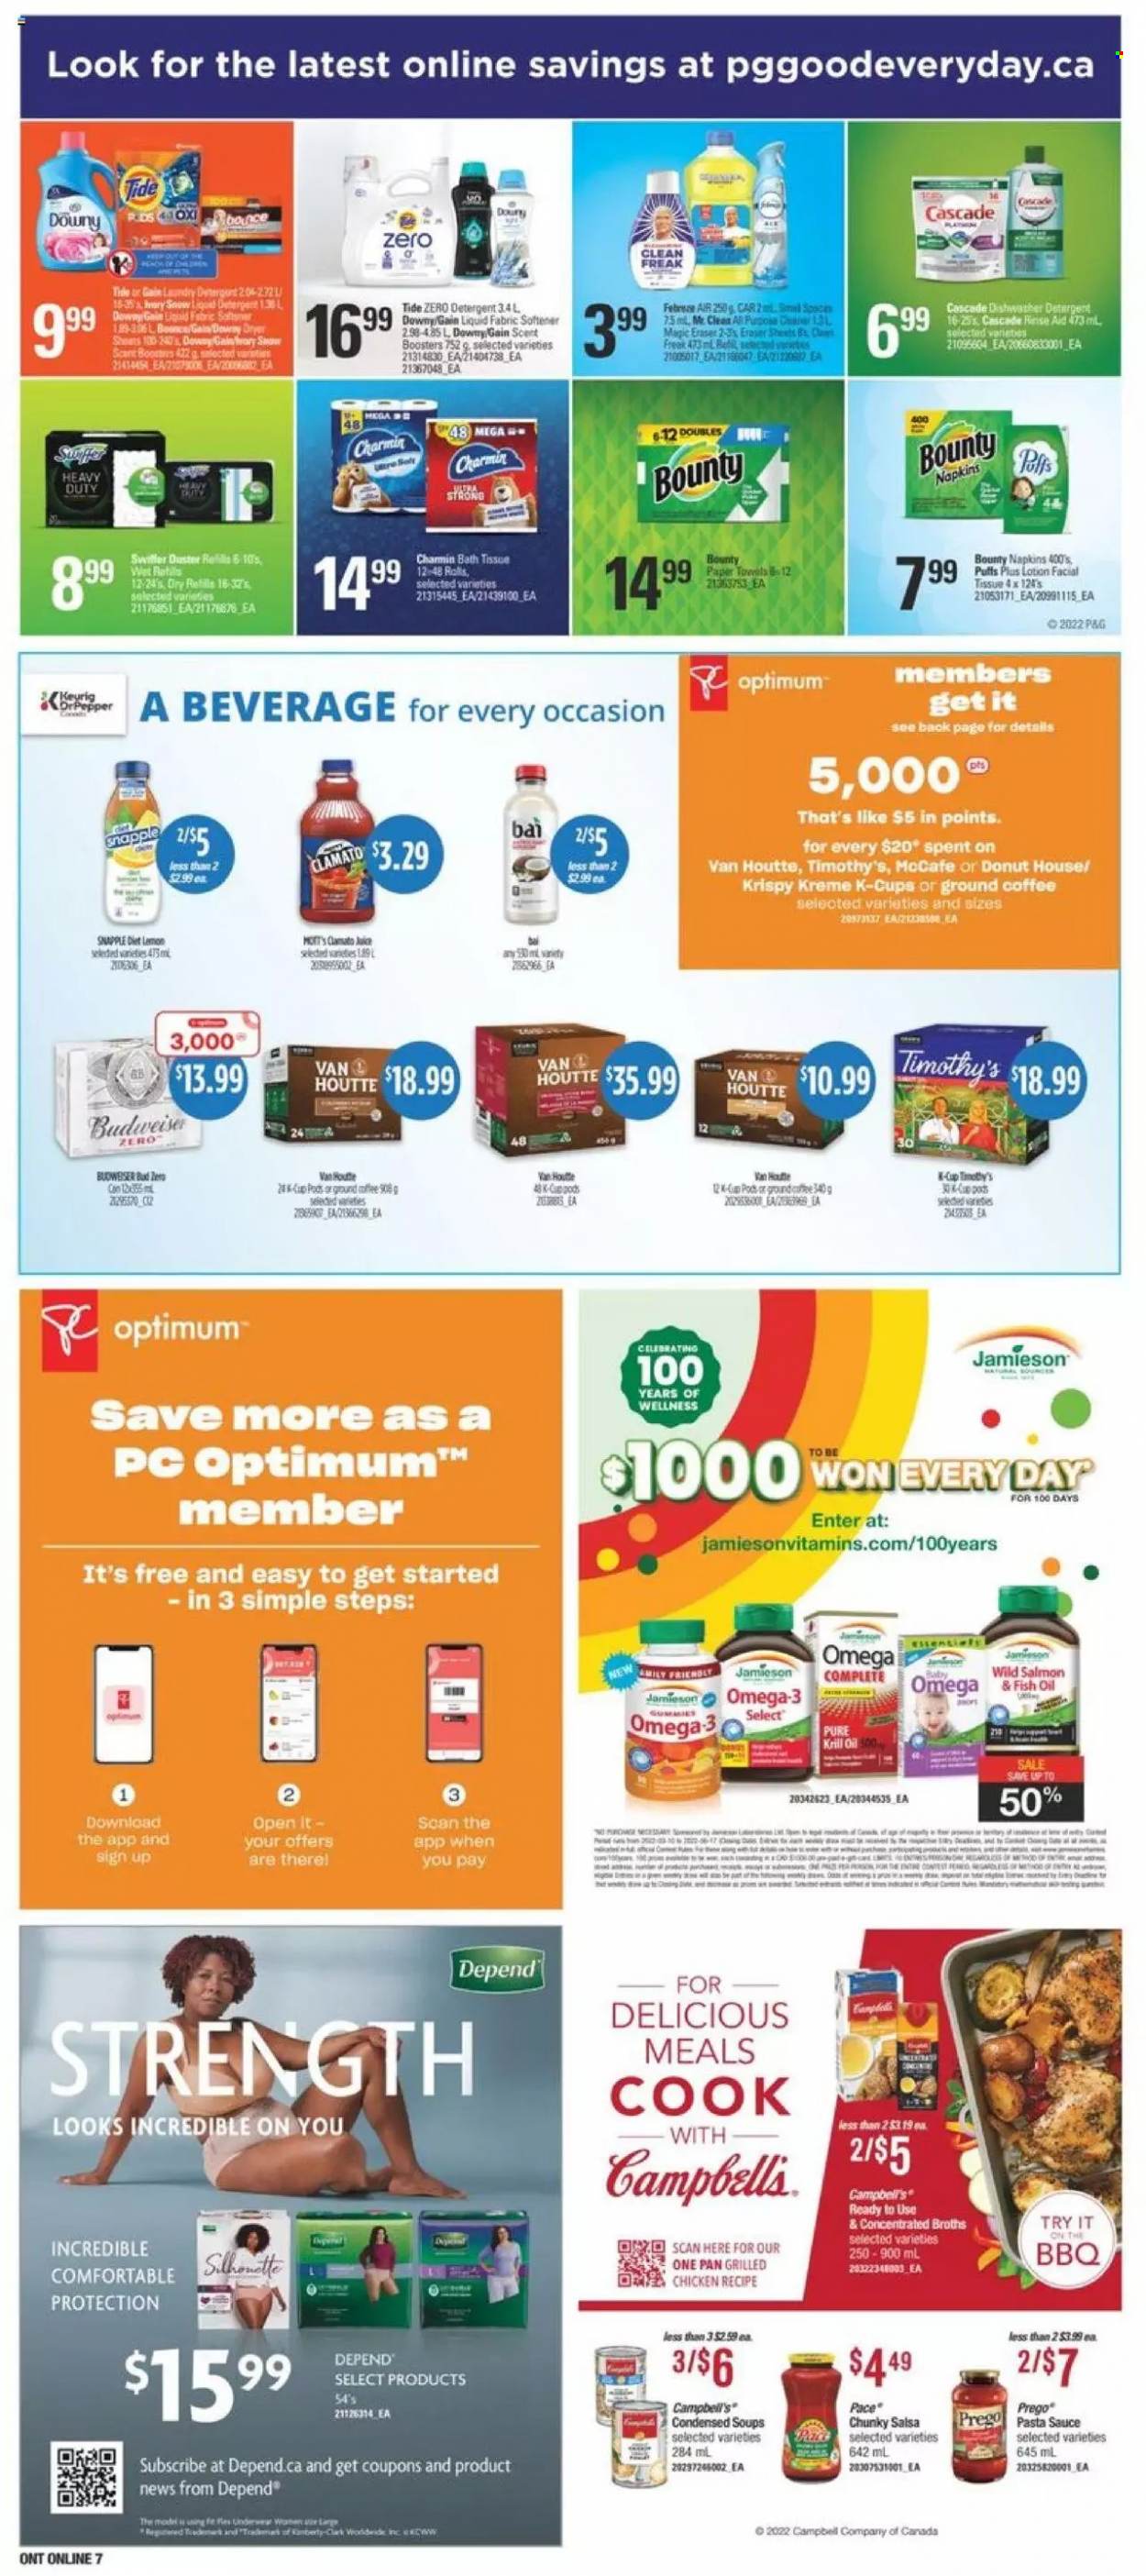 thumbnail - Independent Flyer - May 19, 2022 - May 25, 2022 - Sales products - puffs, salmon, fish, Campbell's, pasta sauce, sauce, Bounty, salsa, Clamato, Snapple, coffee, ground coffee, coffee capsules, McCafe, K-Cups, Keurig, beer, napkins, bath tissue, Charmin, Gain, Tide, fabric softener, Cascade, scent booster, pan, eraser, paper, Optimum, vanity, Omega-3, Budweiser, detergent. Page 14.